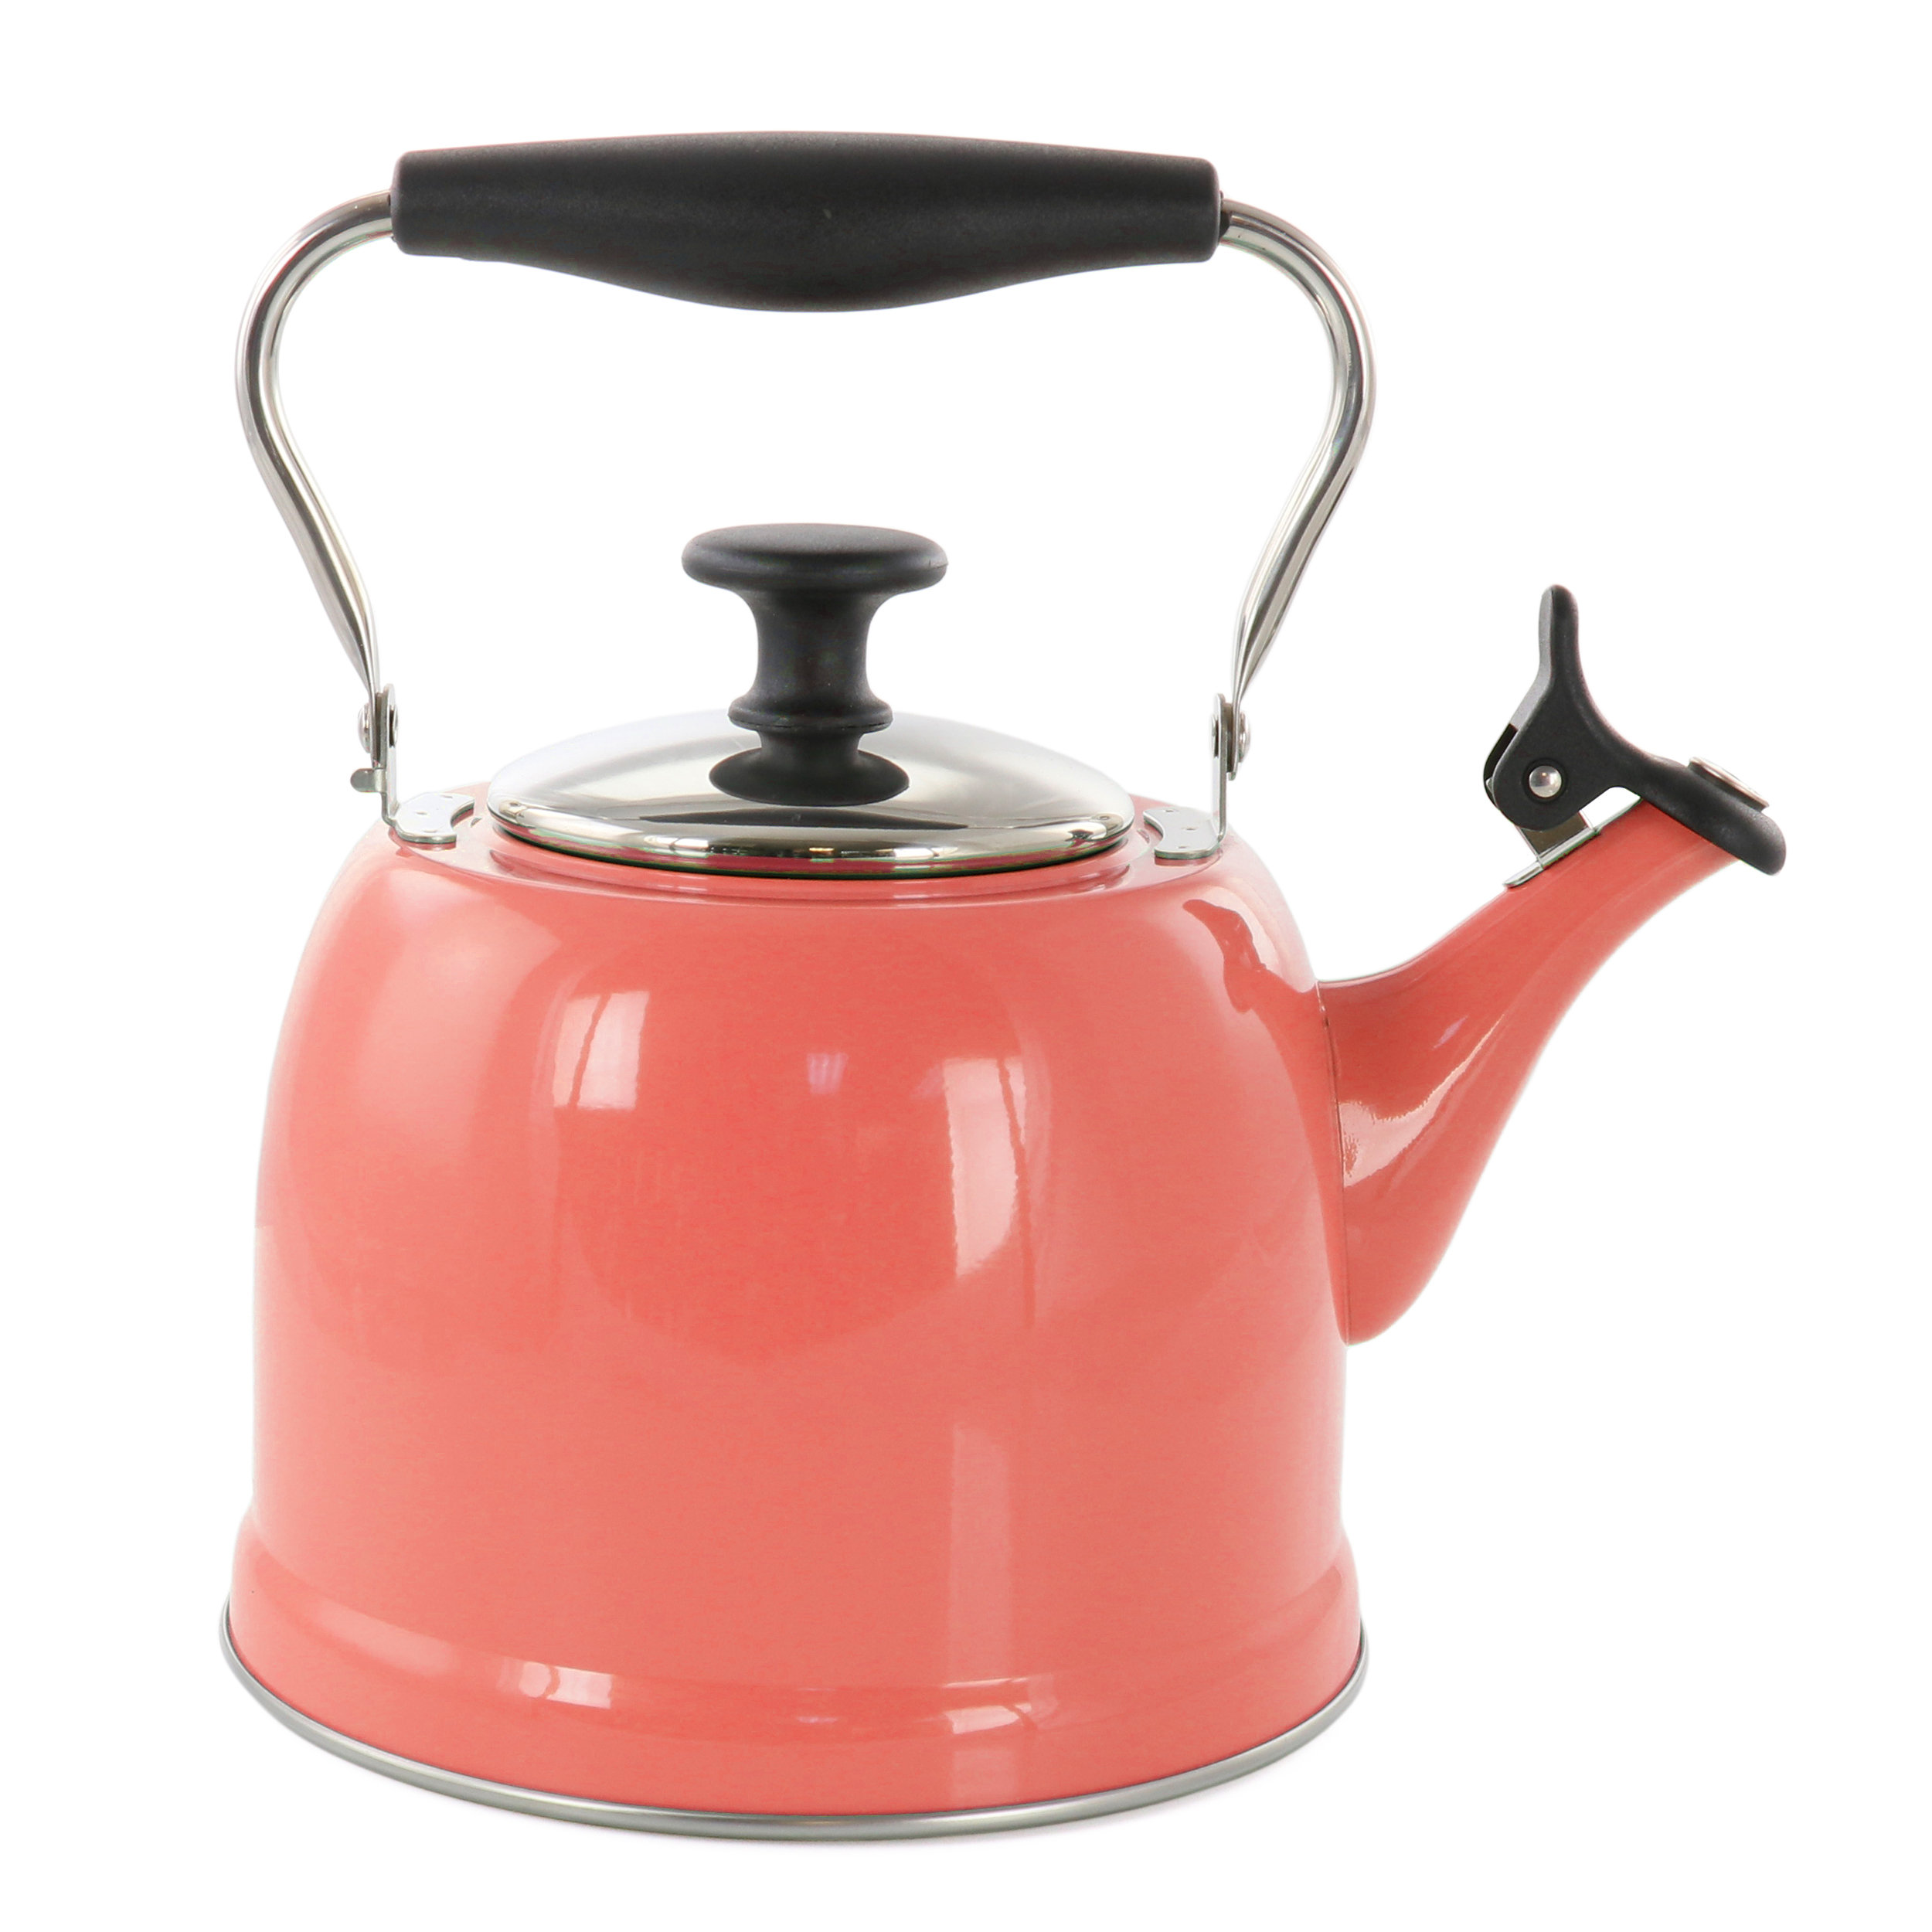 Thick Stainless Steel Tea Pot Insulated Kettle Thermal Teapot Water Pot for Kitchen Restaurant Hotel (Silver, 2L), Size: 22*18*20cm